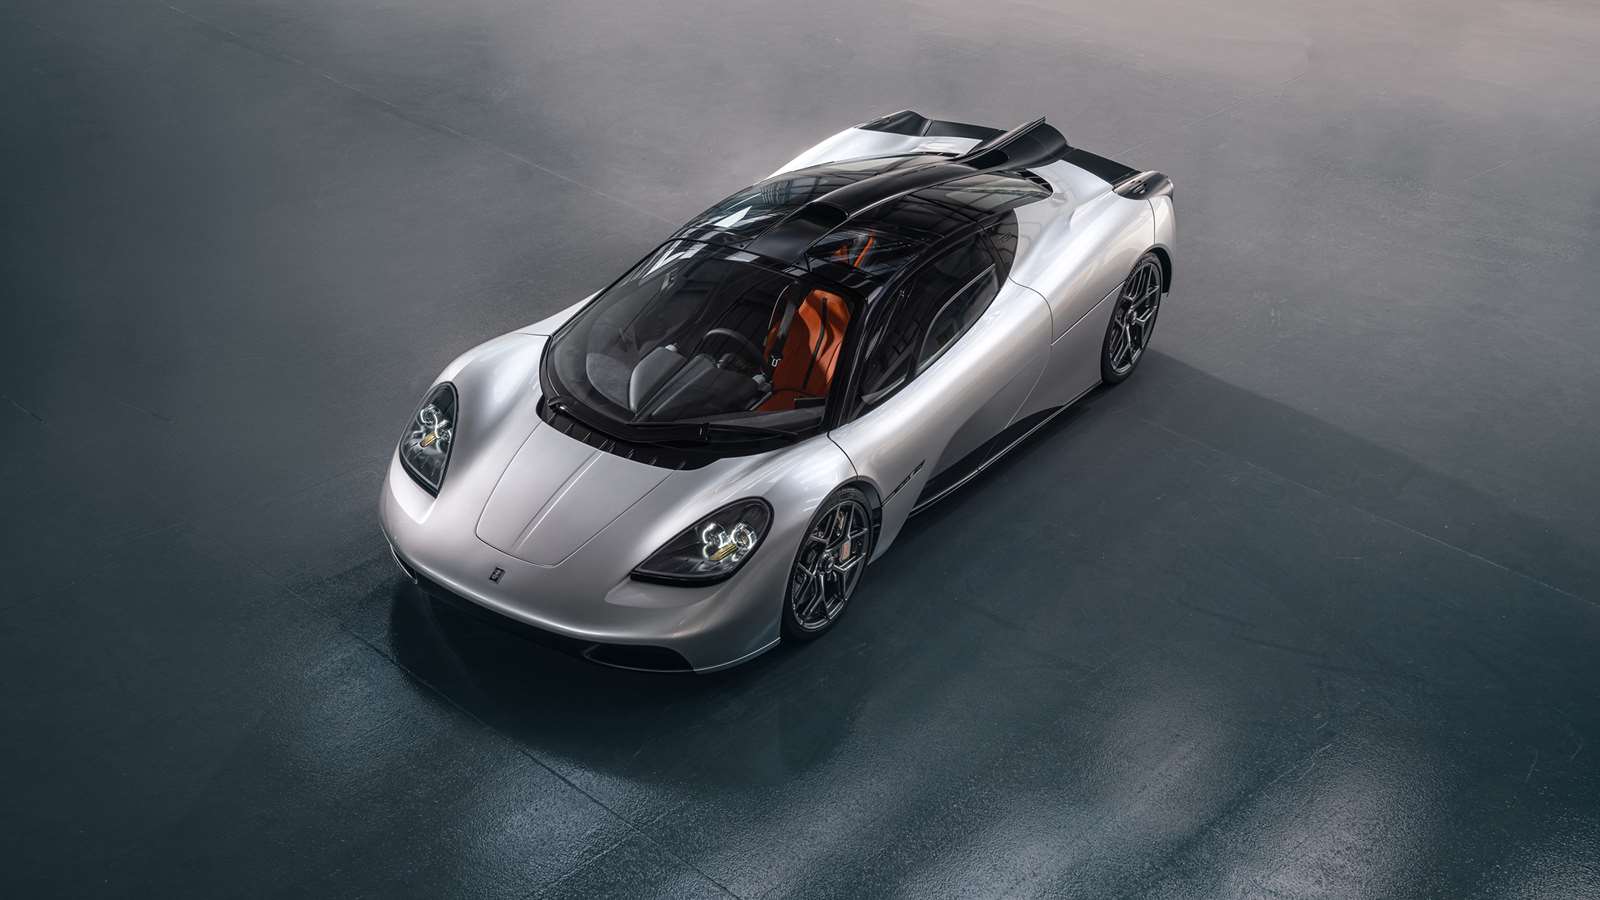 The Gordon Murray Automotive T50 in grey with black accents. The image is taken from above.